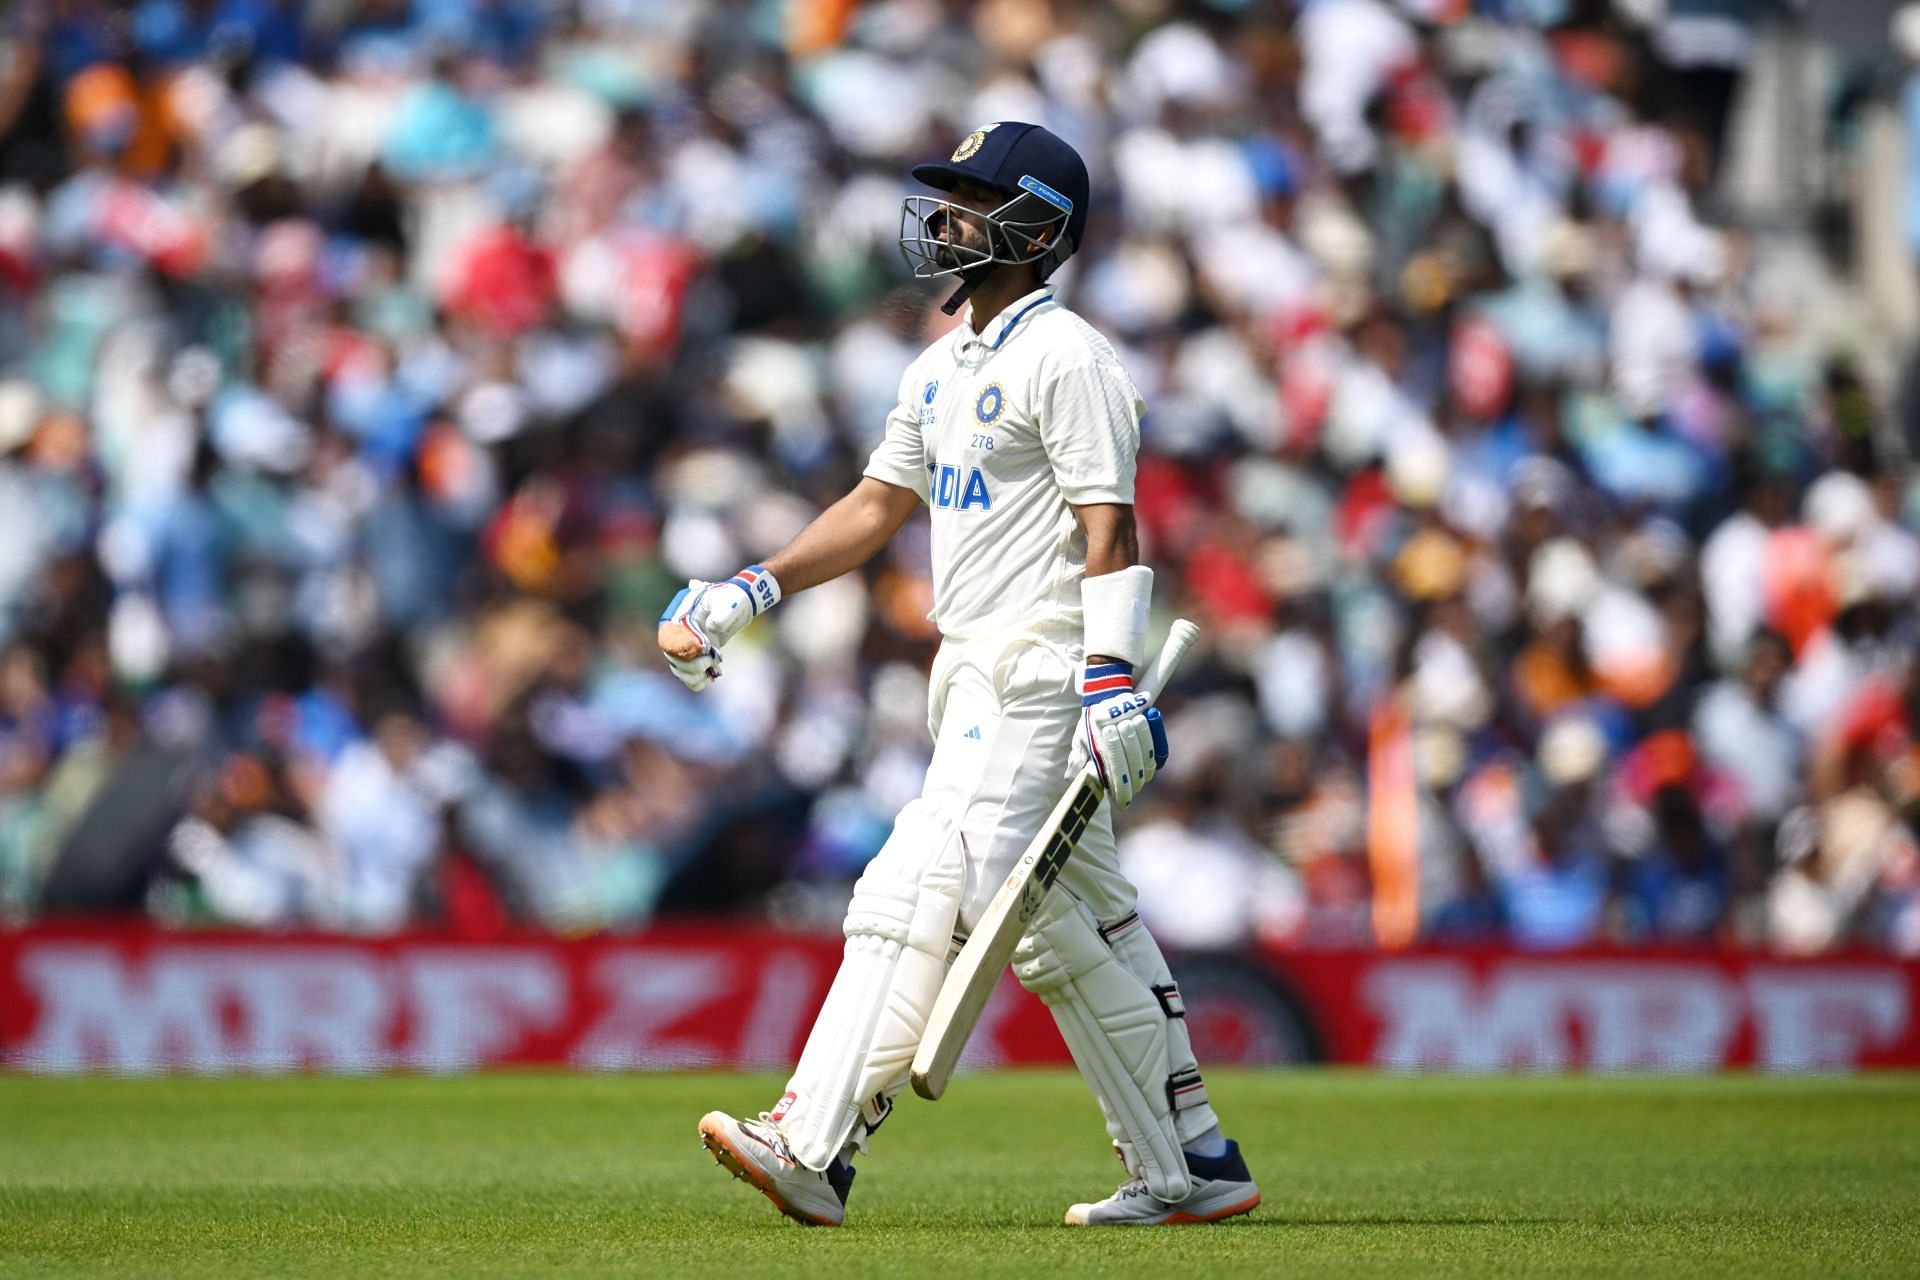 Most Indian batsmen in the Test line-up are right-handers, like vice-captain Ajinkya Rahane